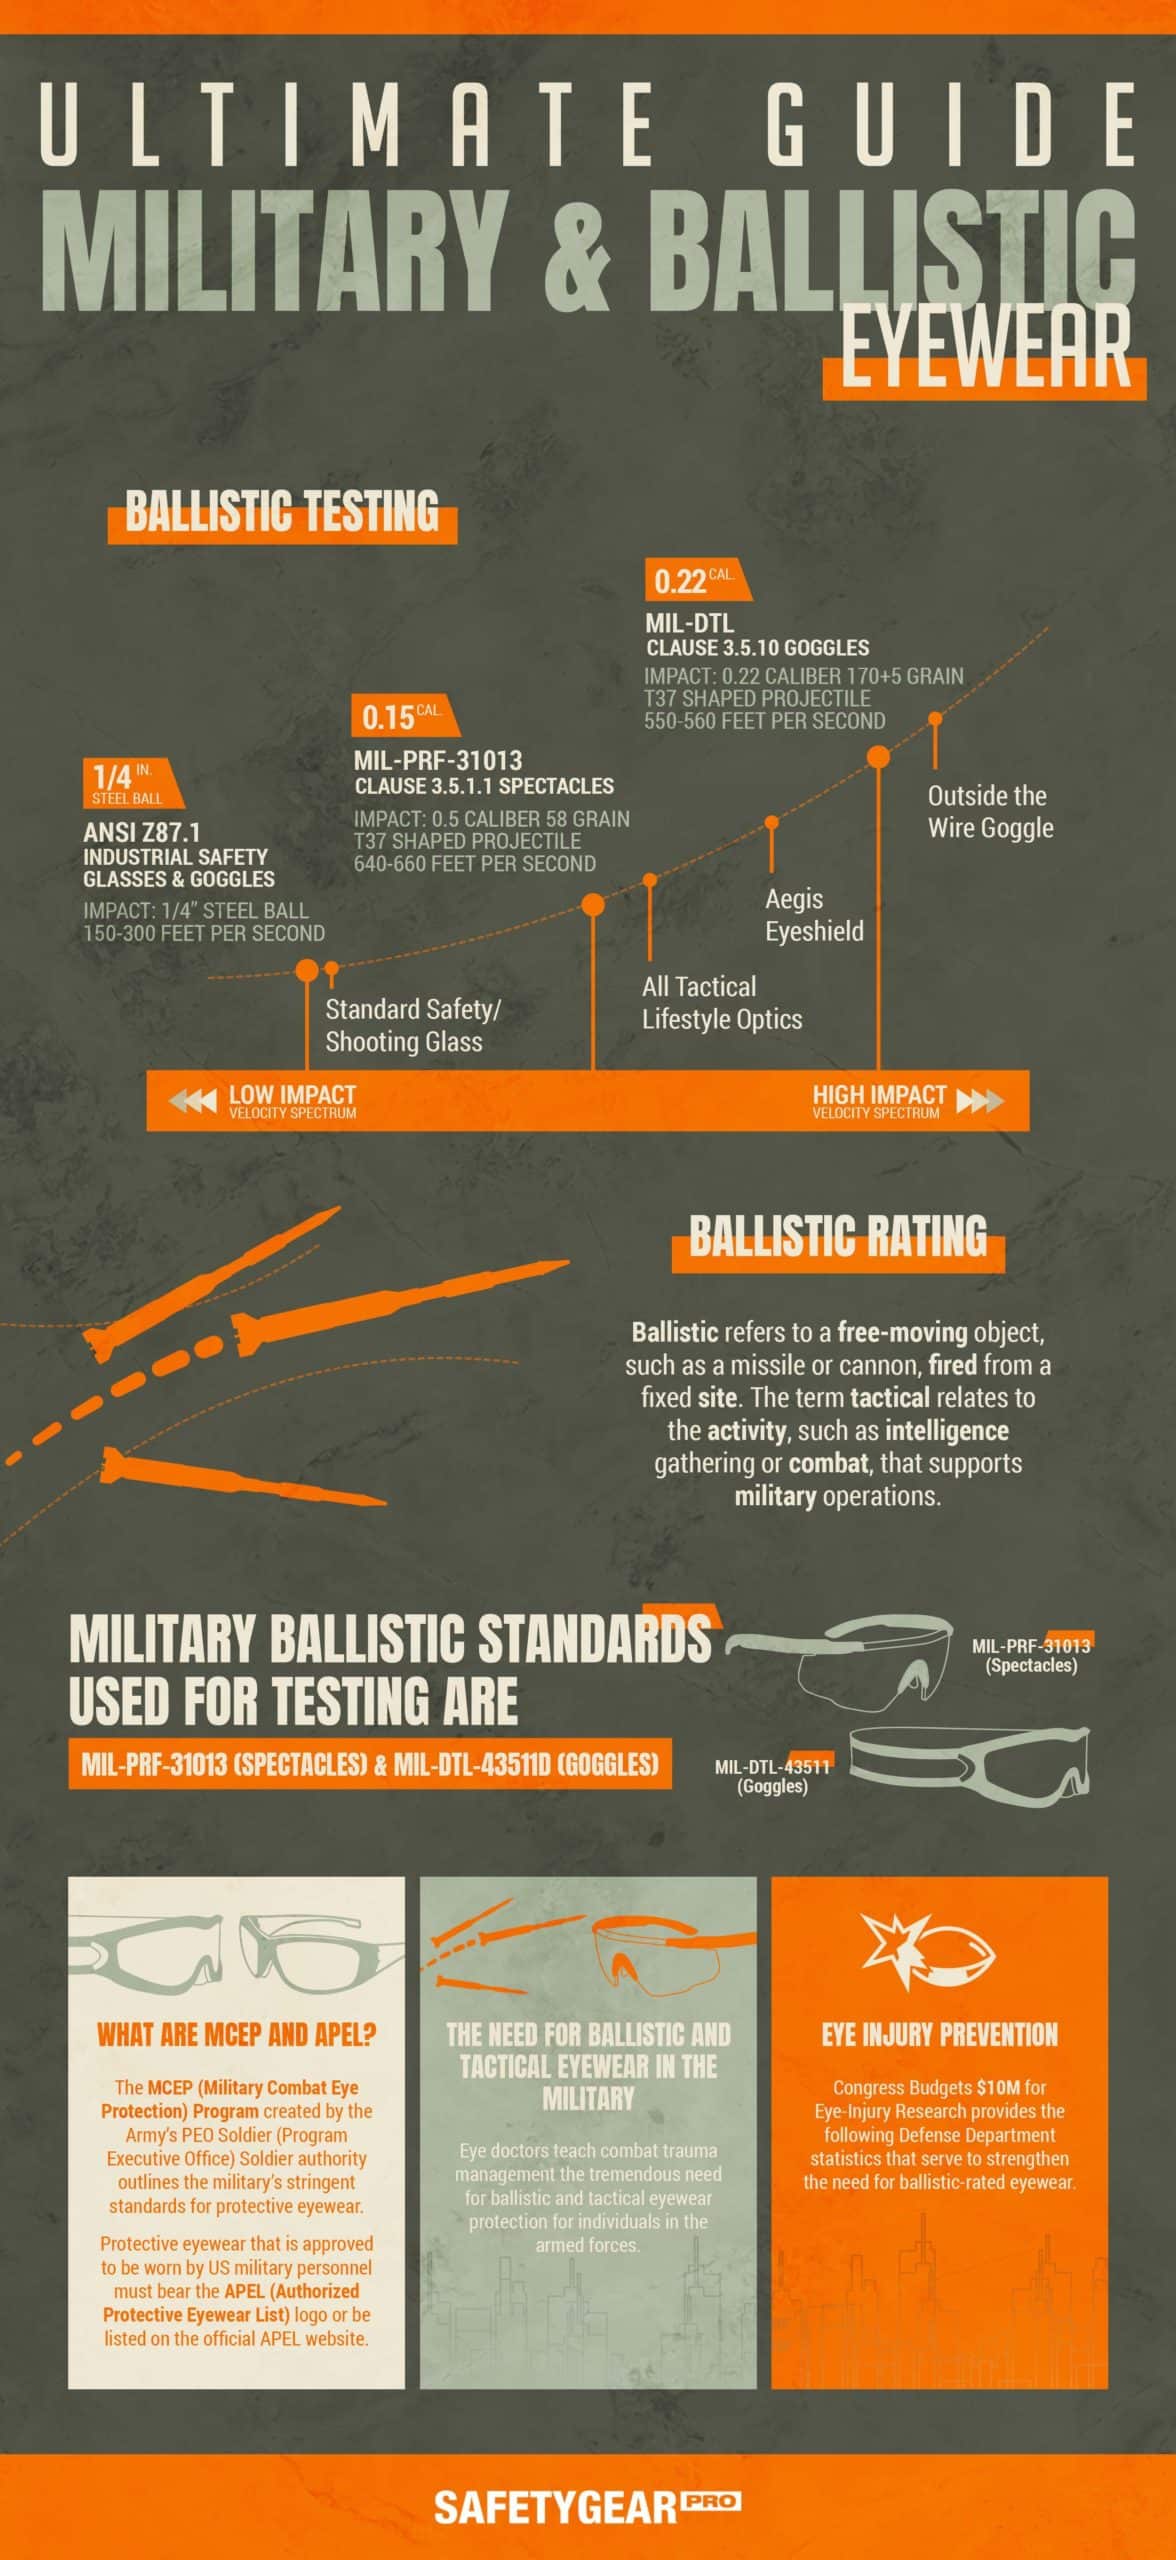 Ultimate Guide to Military & Ballistic Eyewear Infographic